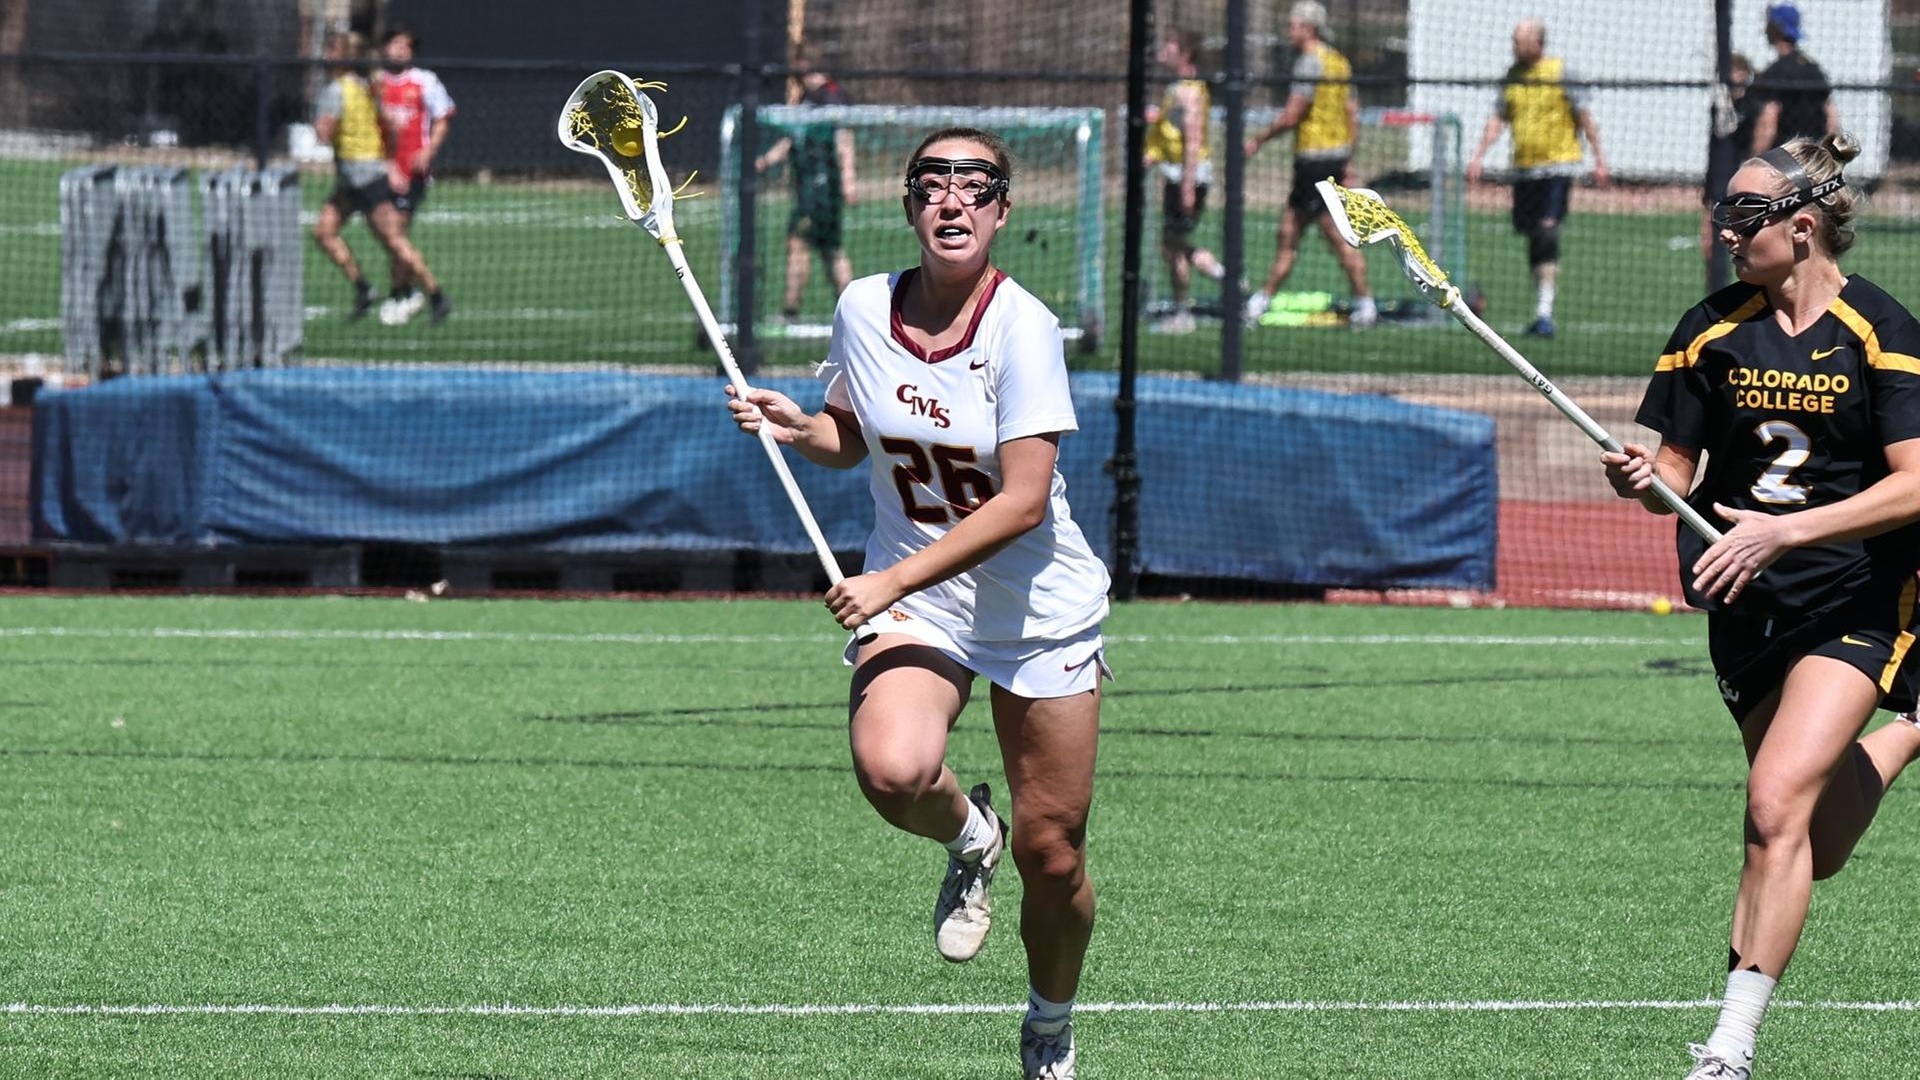 Paige Morgan had two goals and two assists (photo by Charlie Lengal)